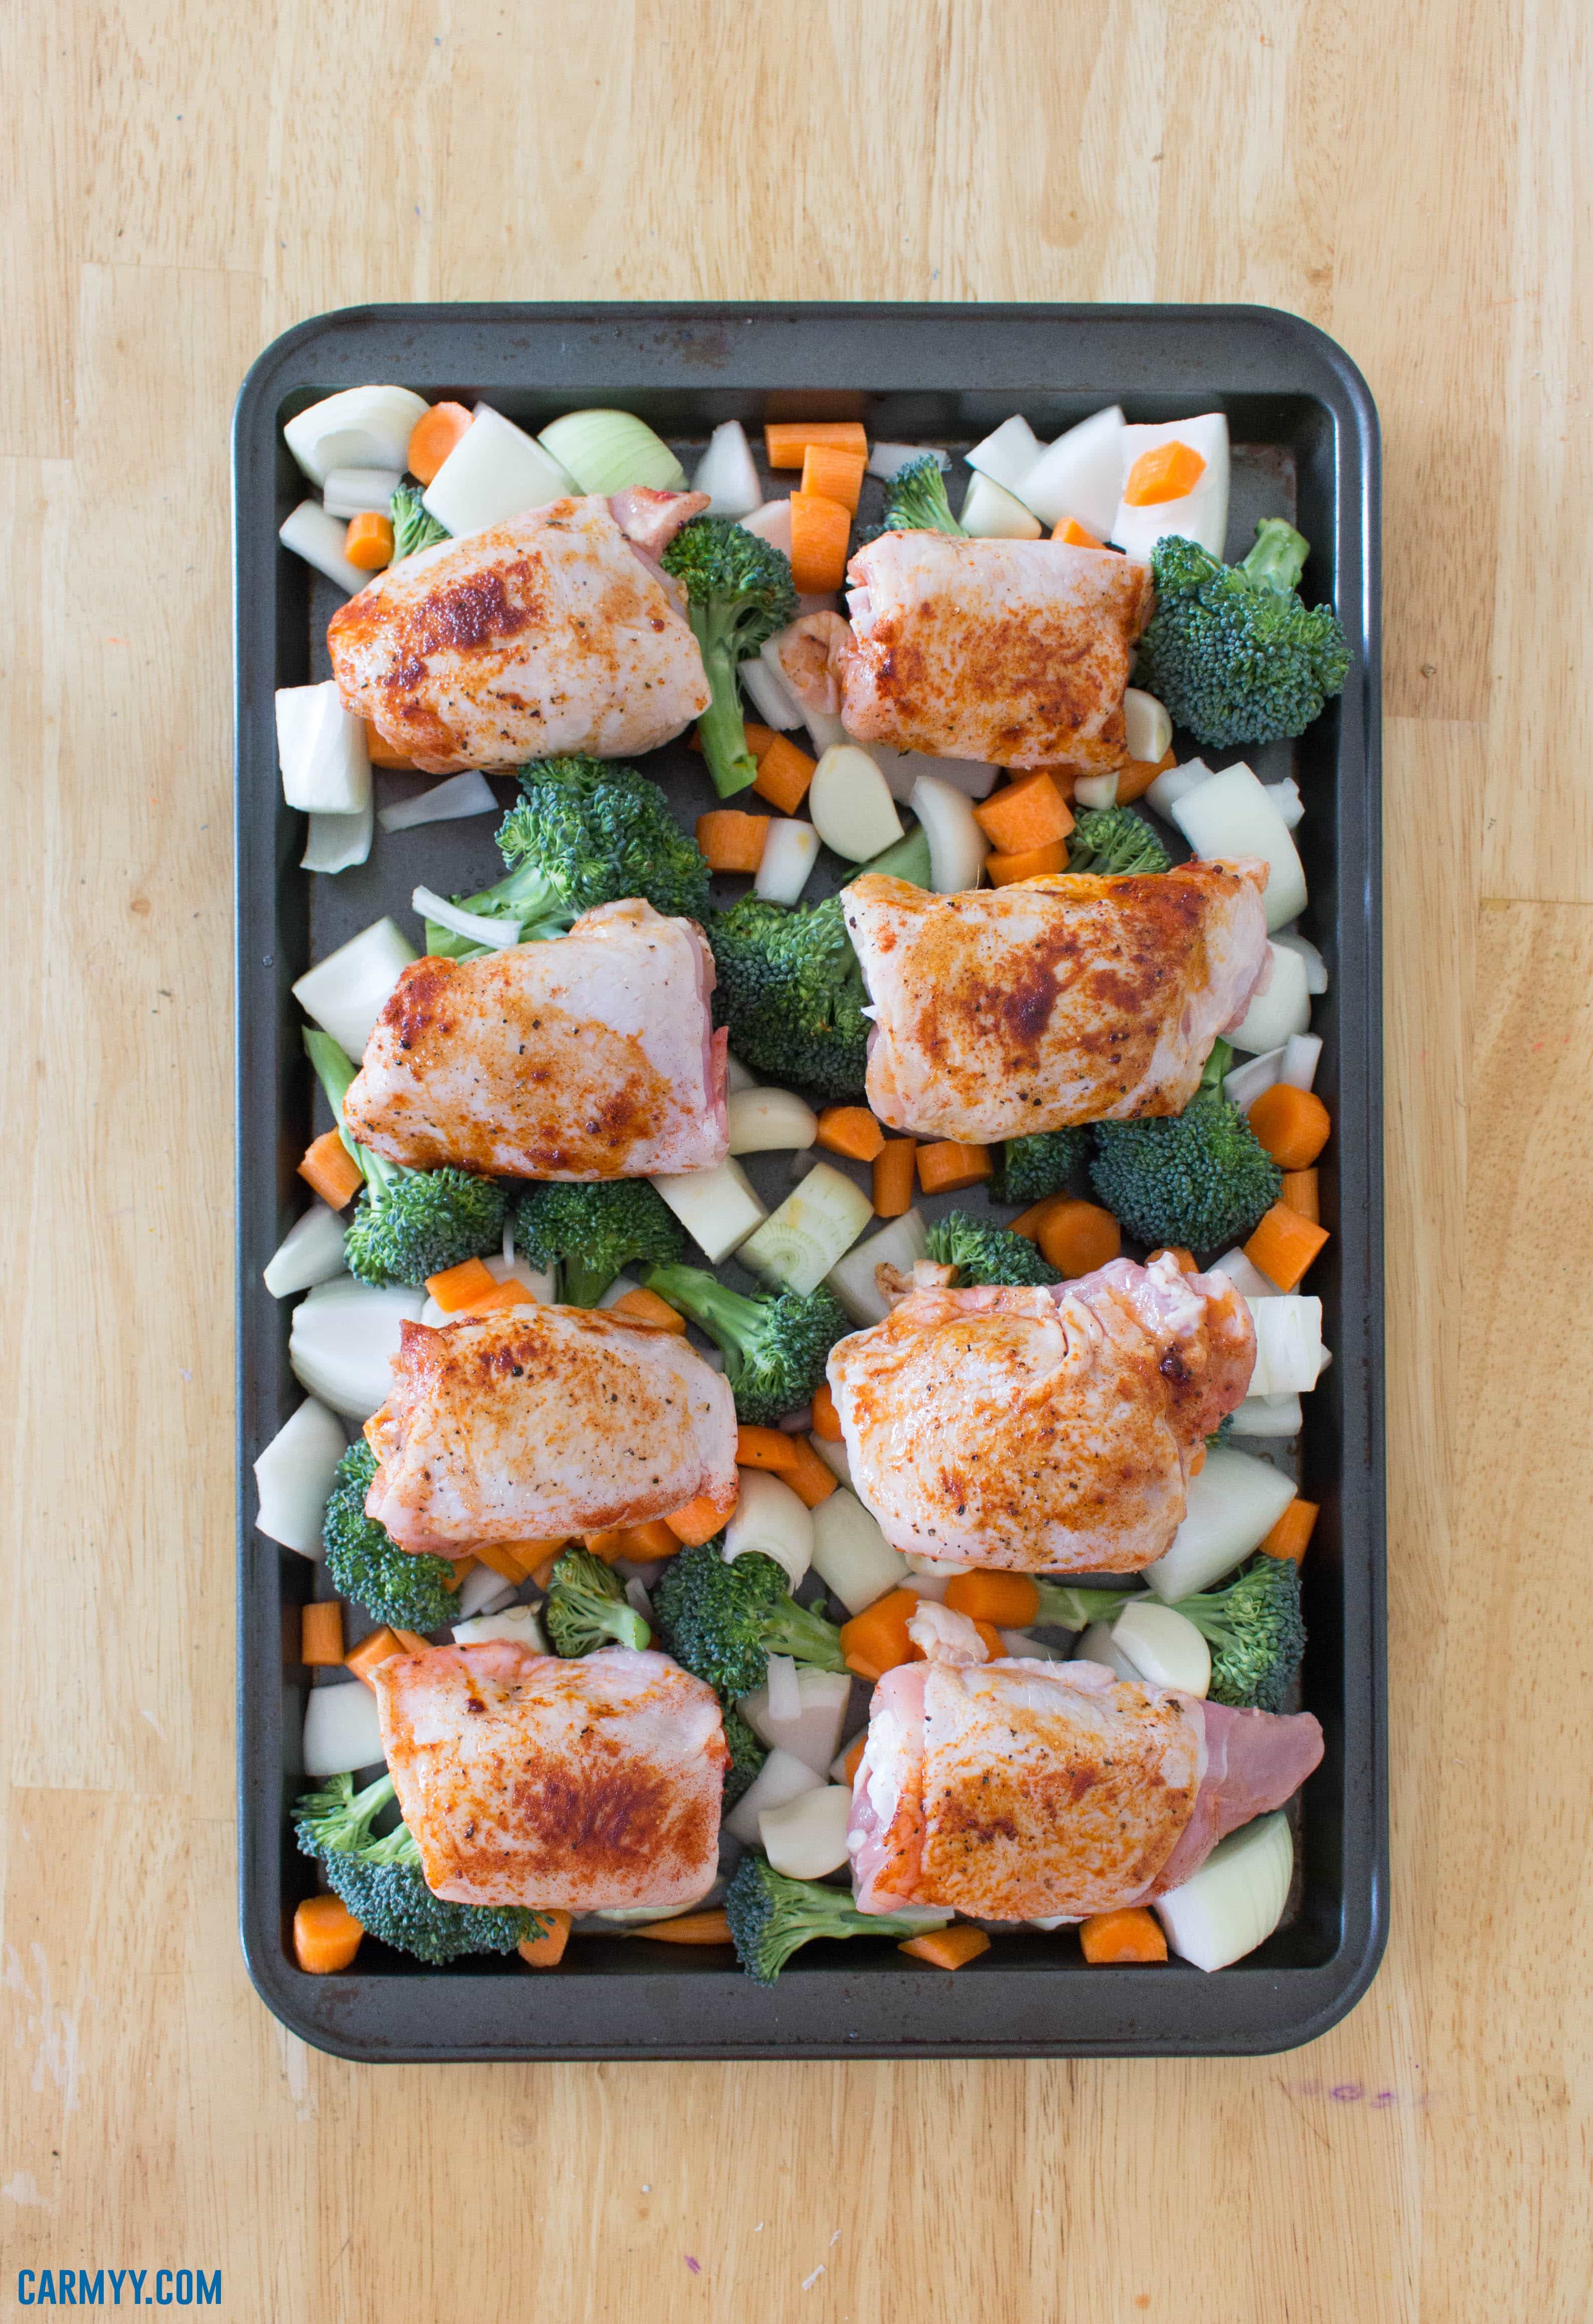 Super Easy and Fast Dinner Idea: One Sheet Pan Chicken and Vegetables